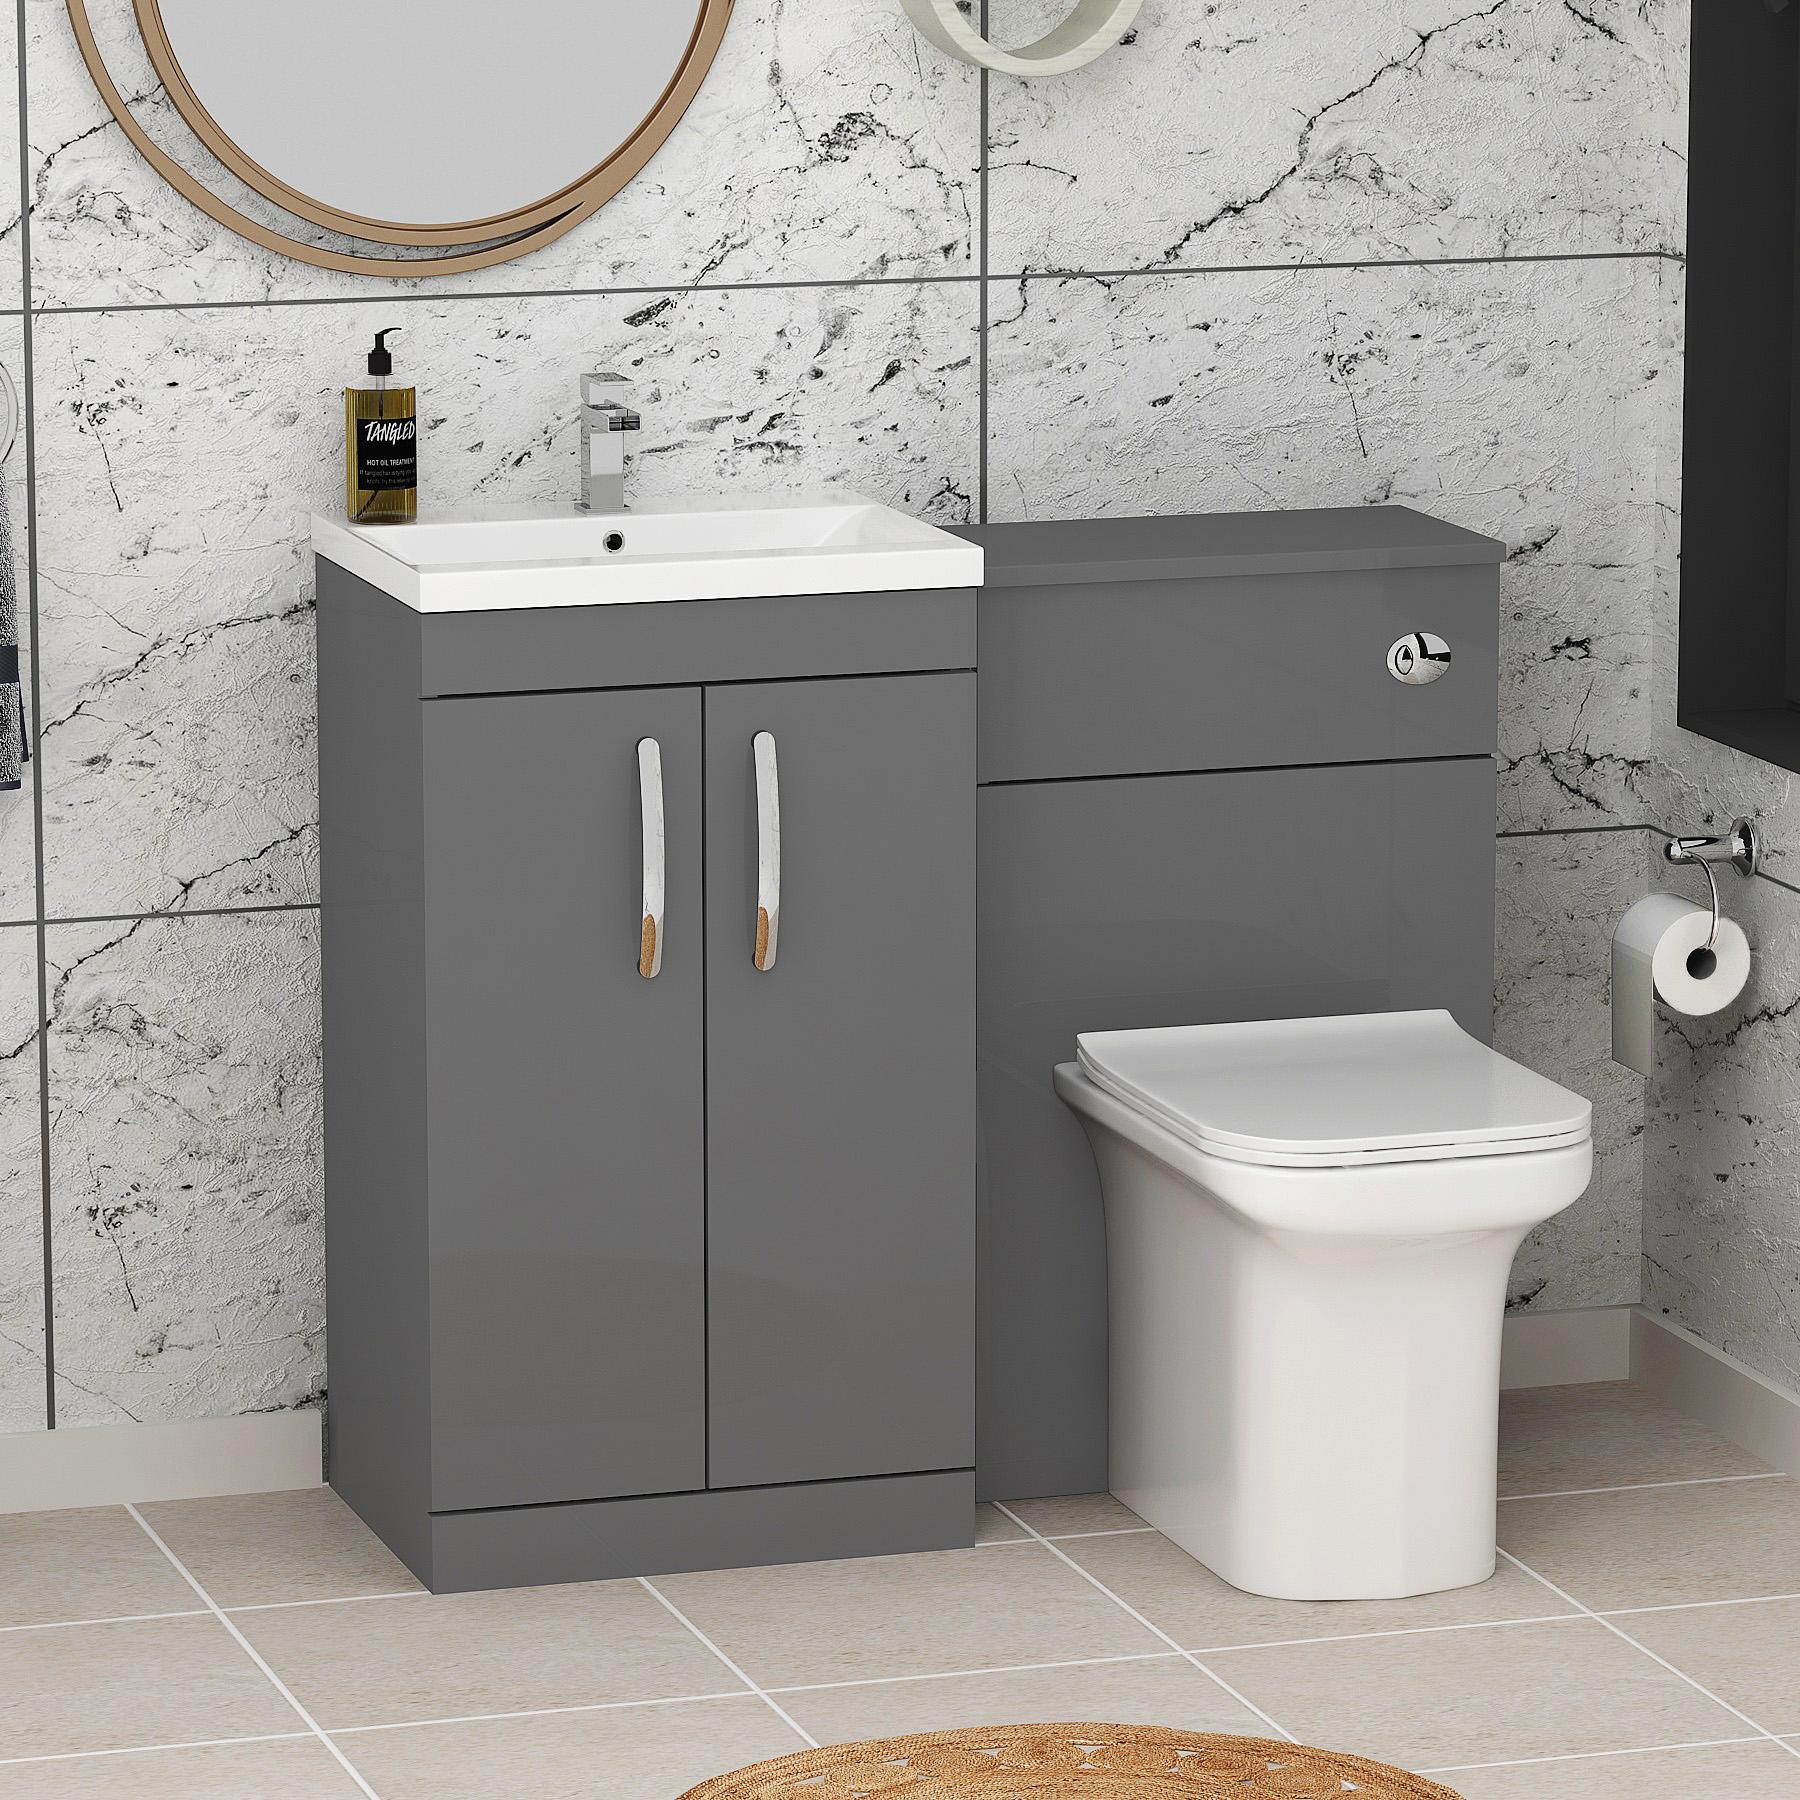 Grey bathroom cabinets the best solution for your bathroom